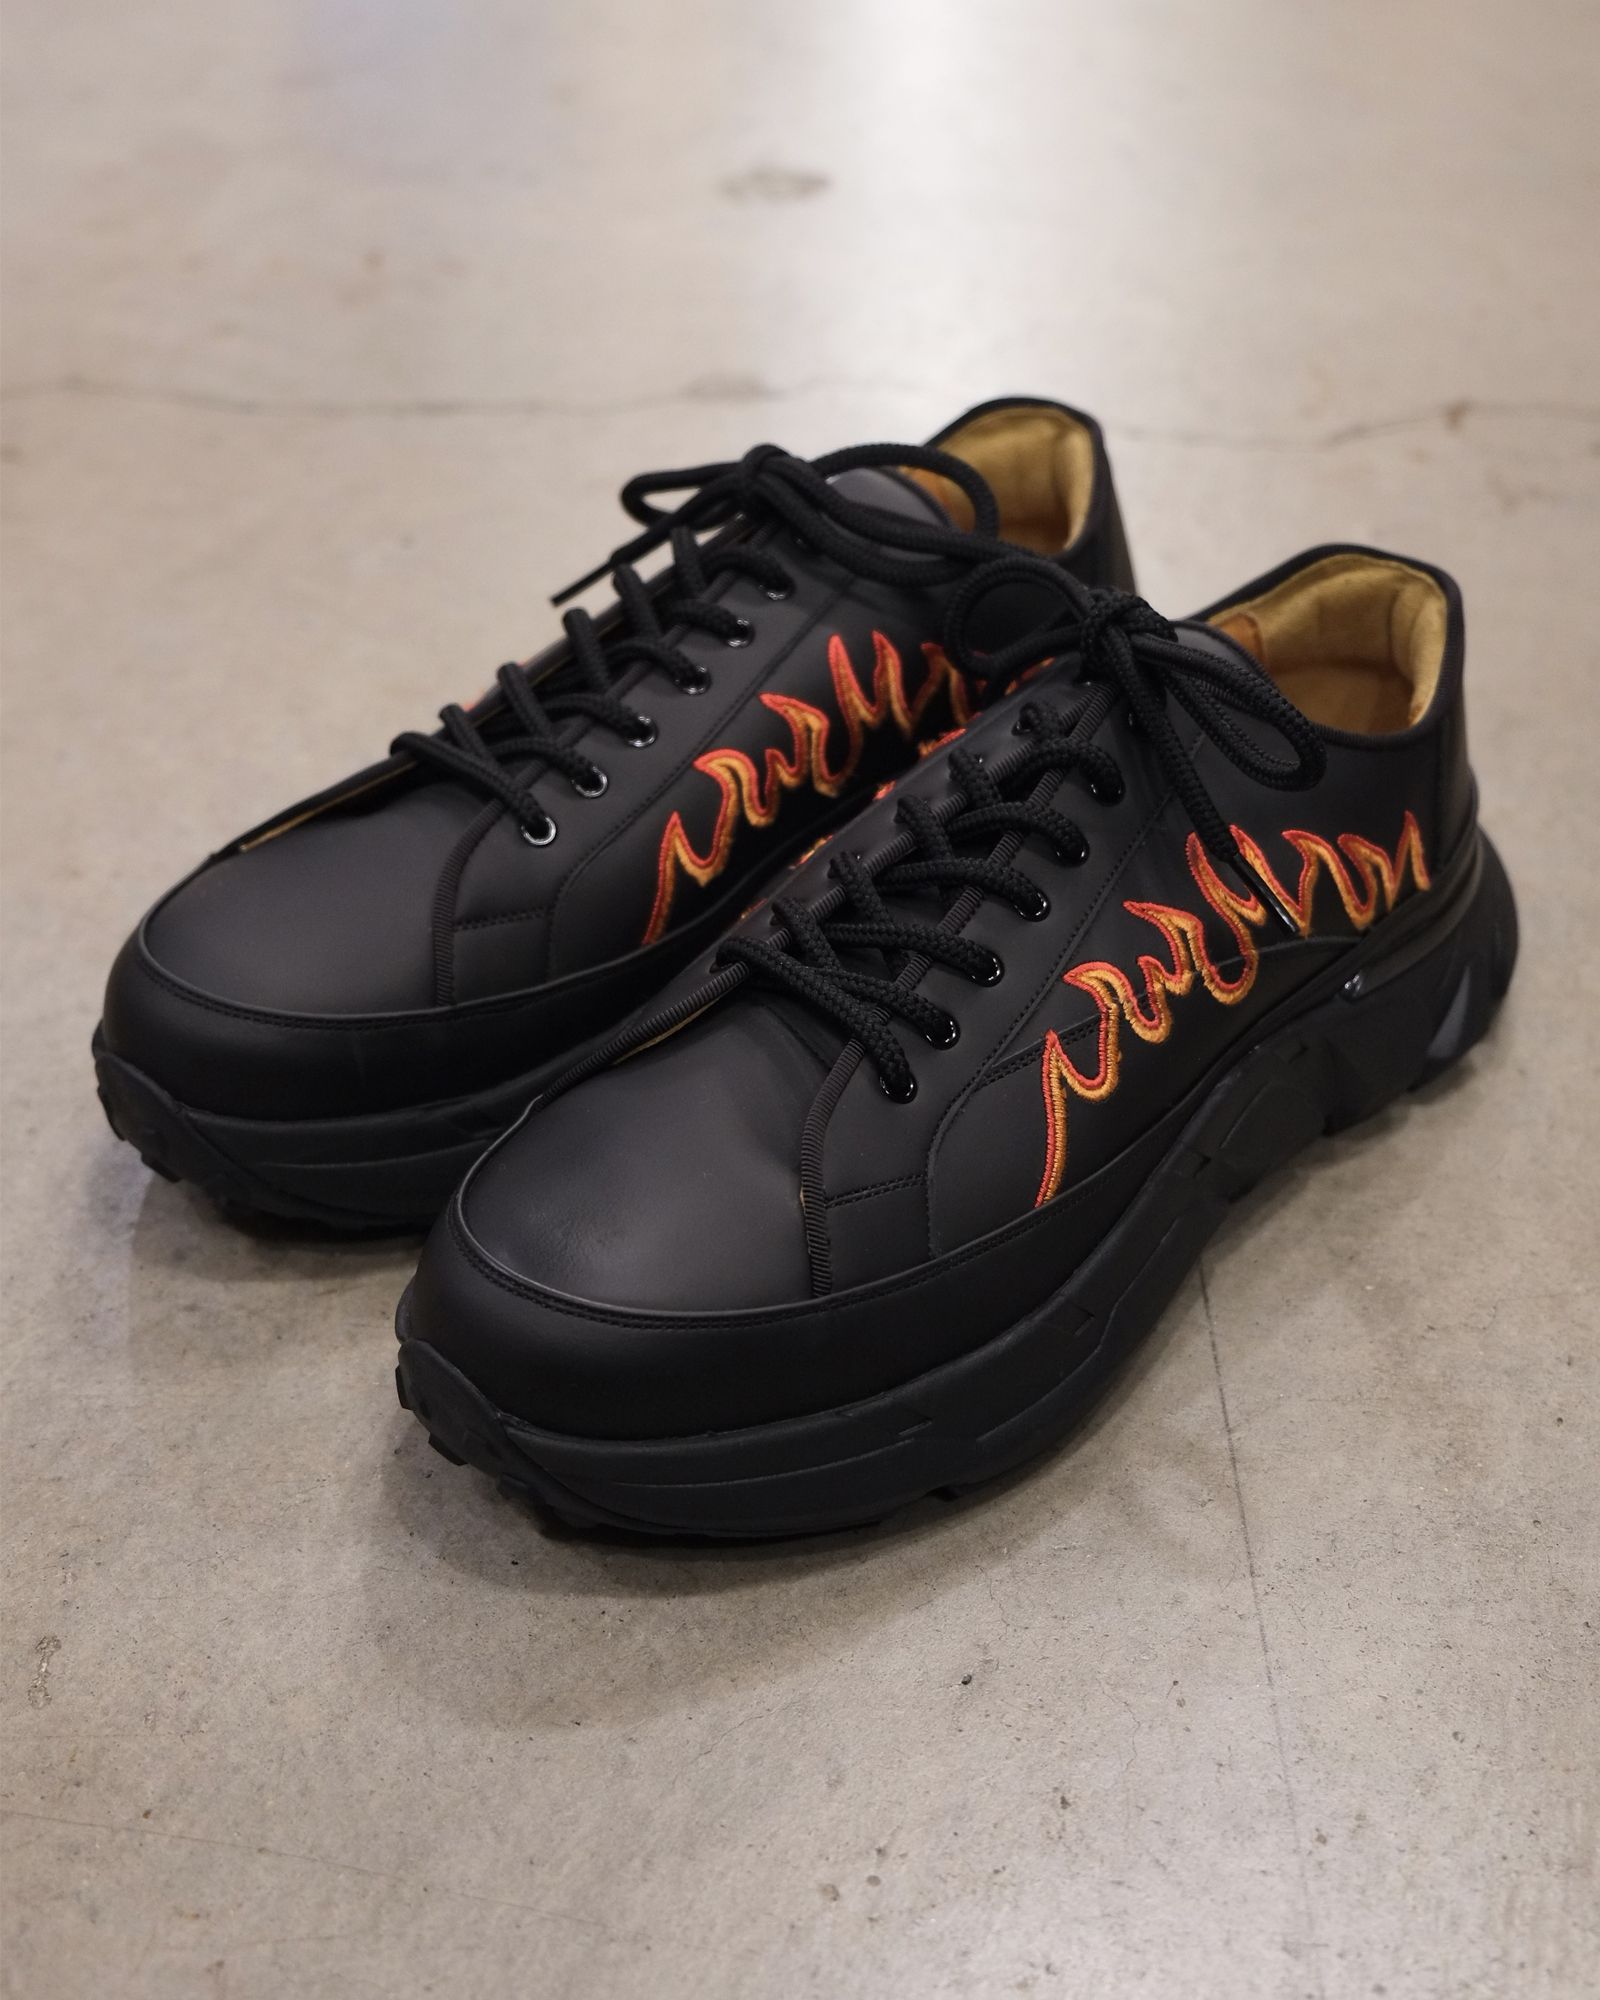 TENDER PERSON - Flame Embroidery Shoes | fakejam